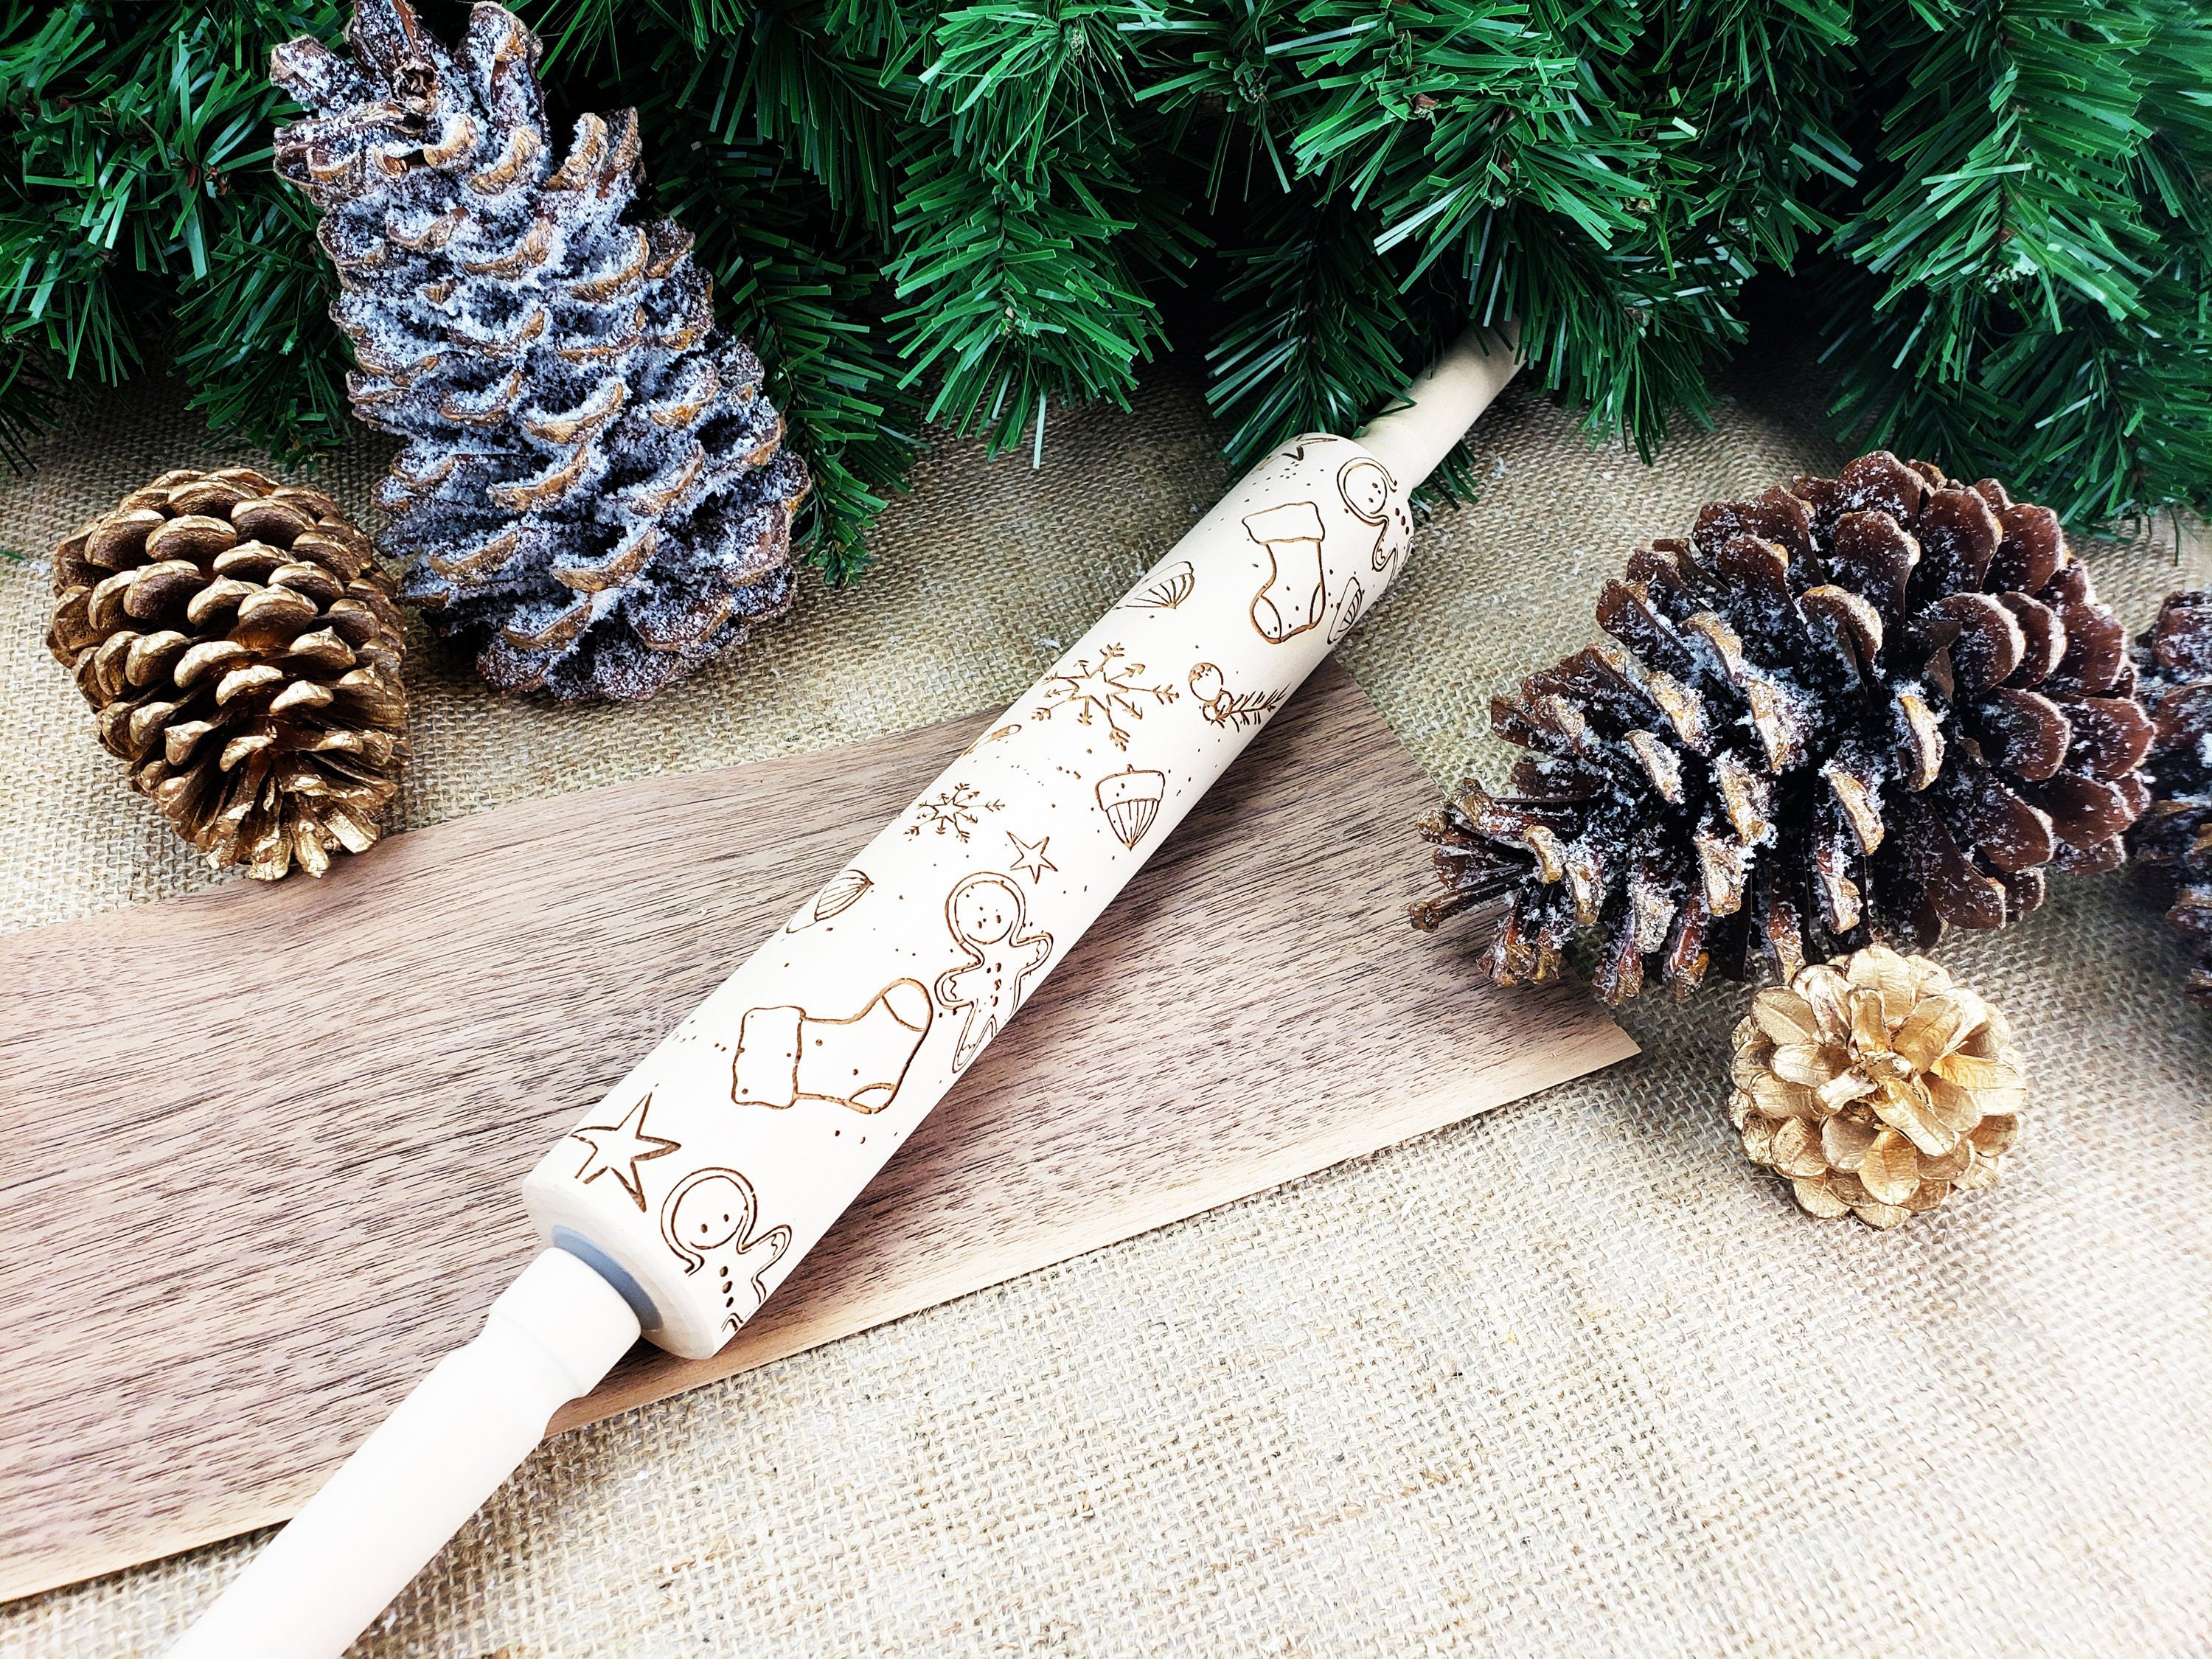 Embossed Rolling Pin, Сedar Cone, Christmas Gift for Her Handmade